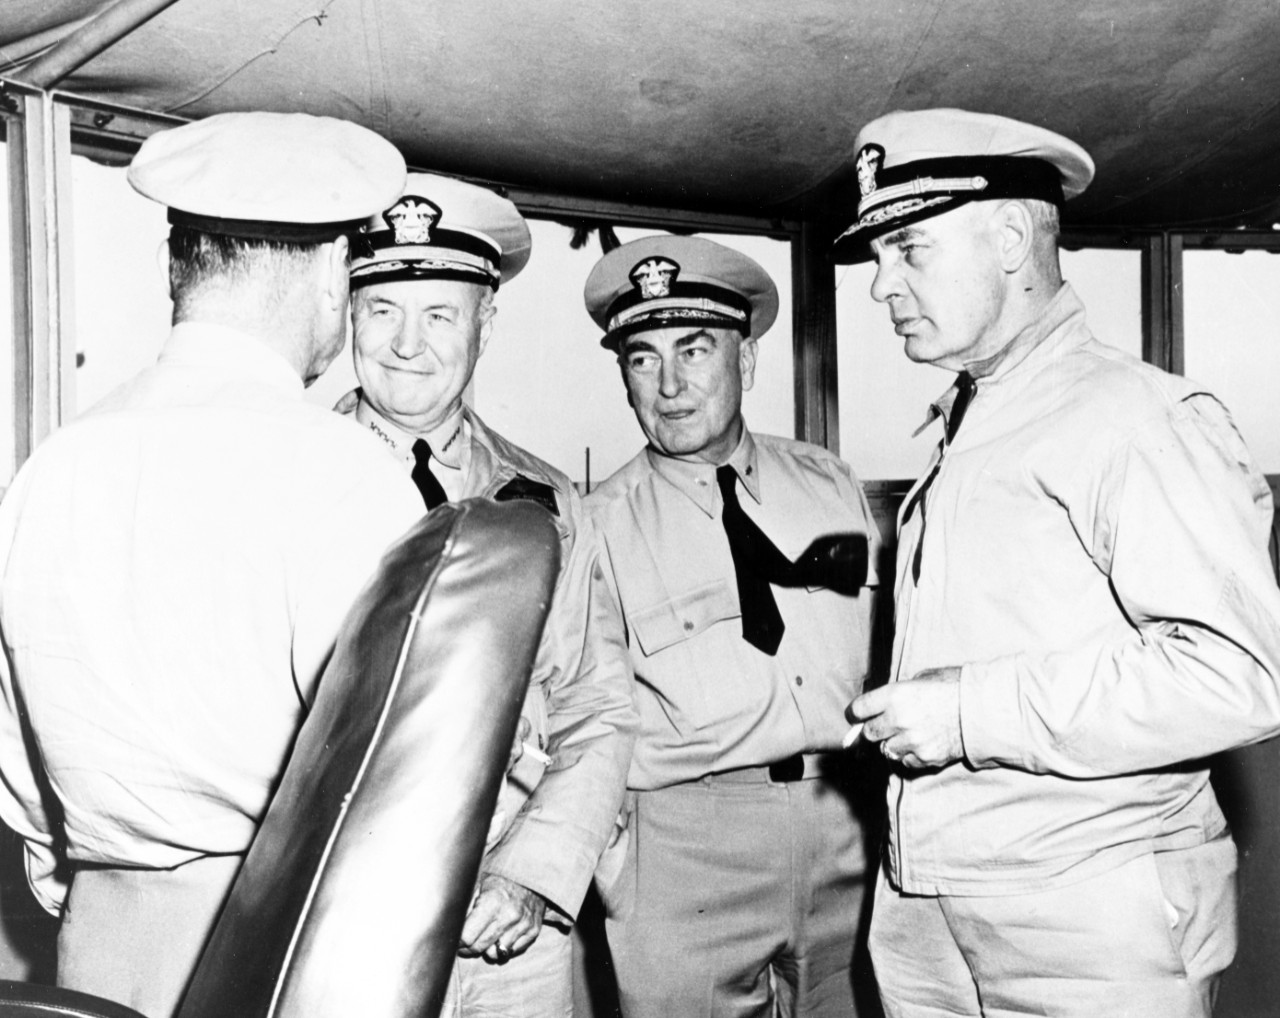 Photo #: 80-G-431252  Admiral Forrest P. Sherman, USN, Chief of Naval Operations (2nd from left)  